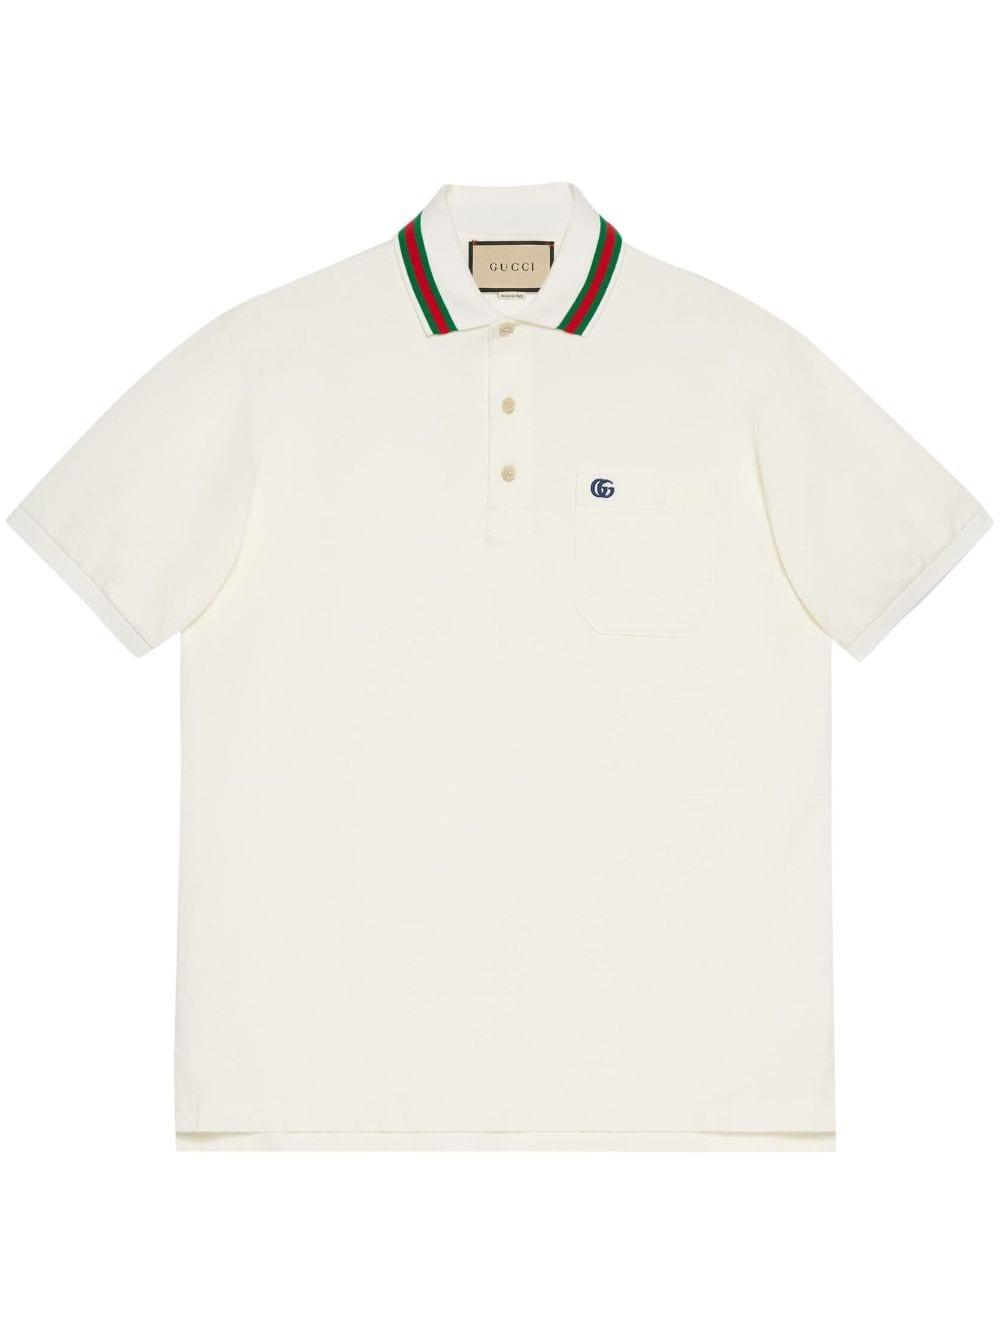 Gucci Cotton Piquet Polo With Double G in White for Men | Lyst